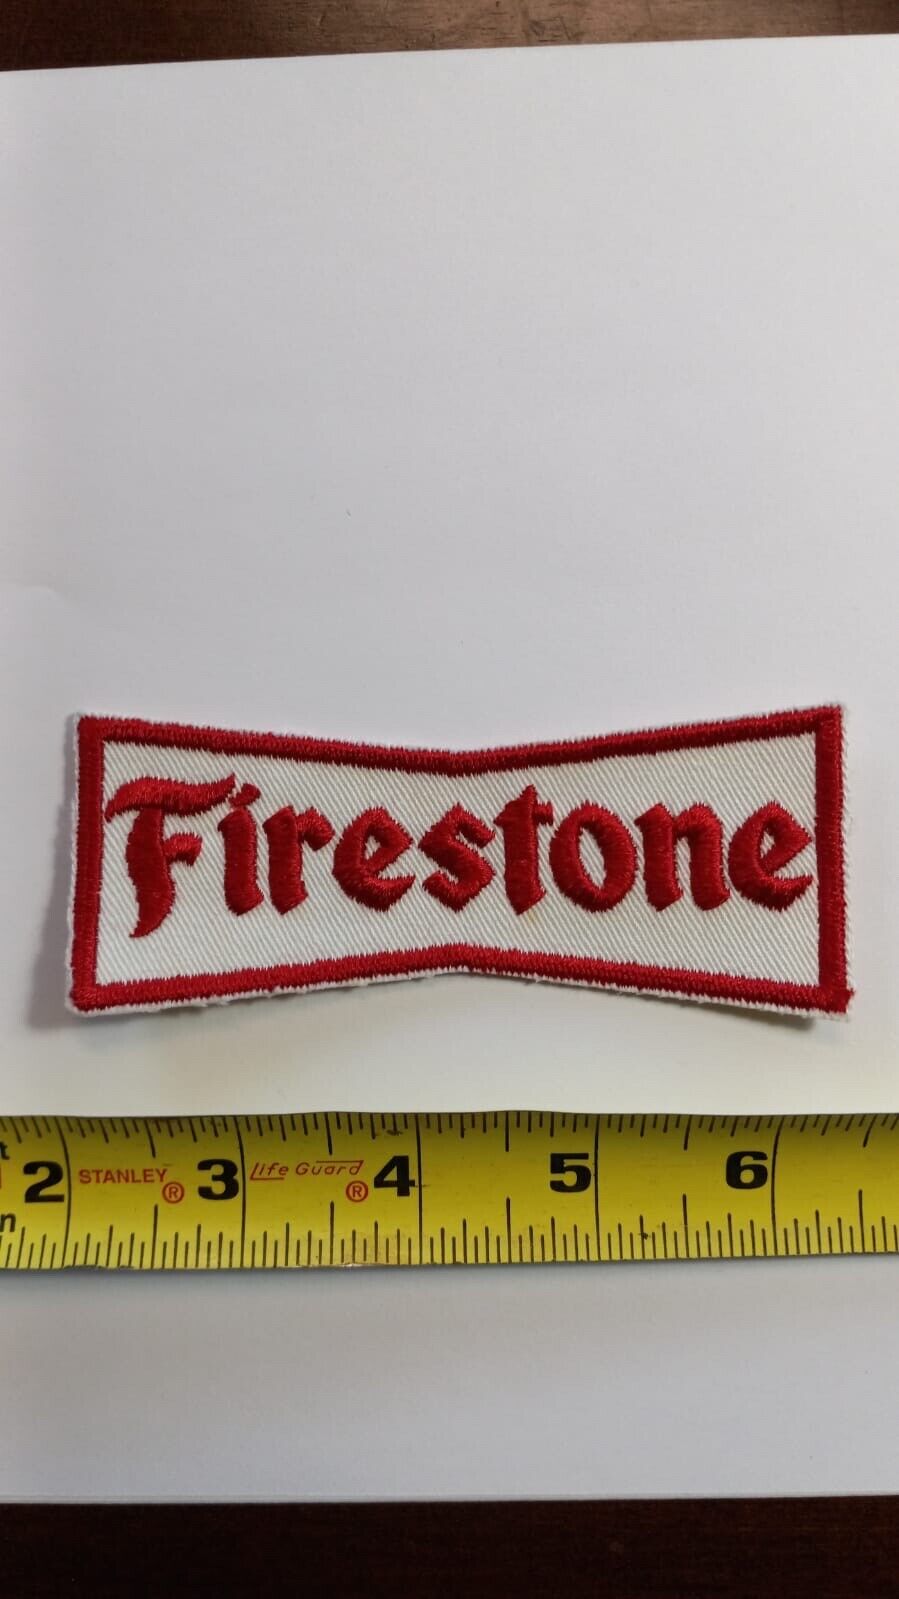 Vintage Sew-on Firestone Racing Patch